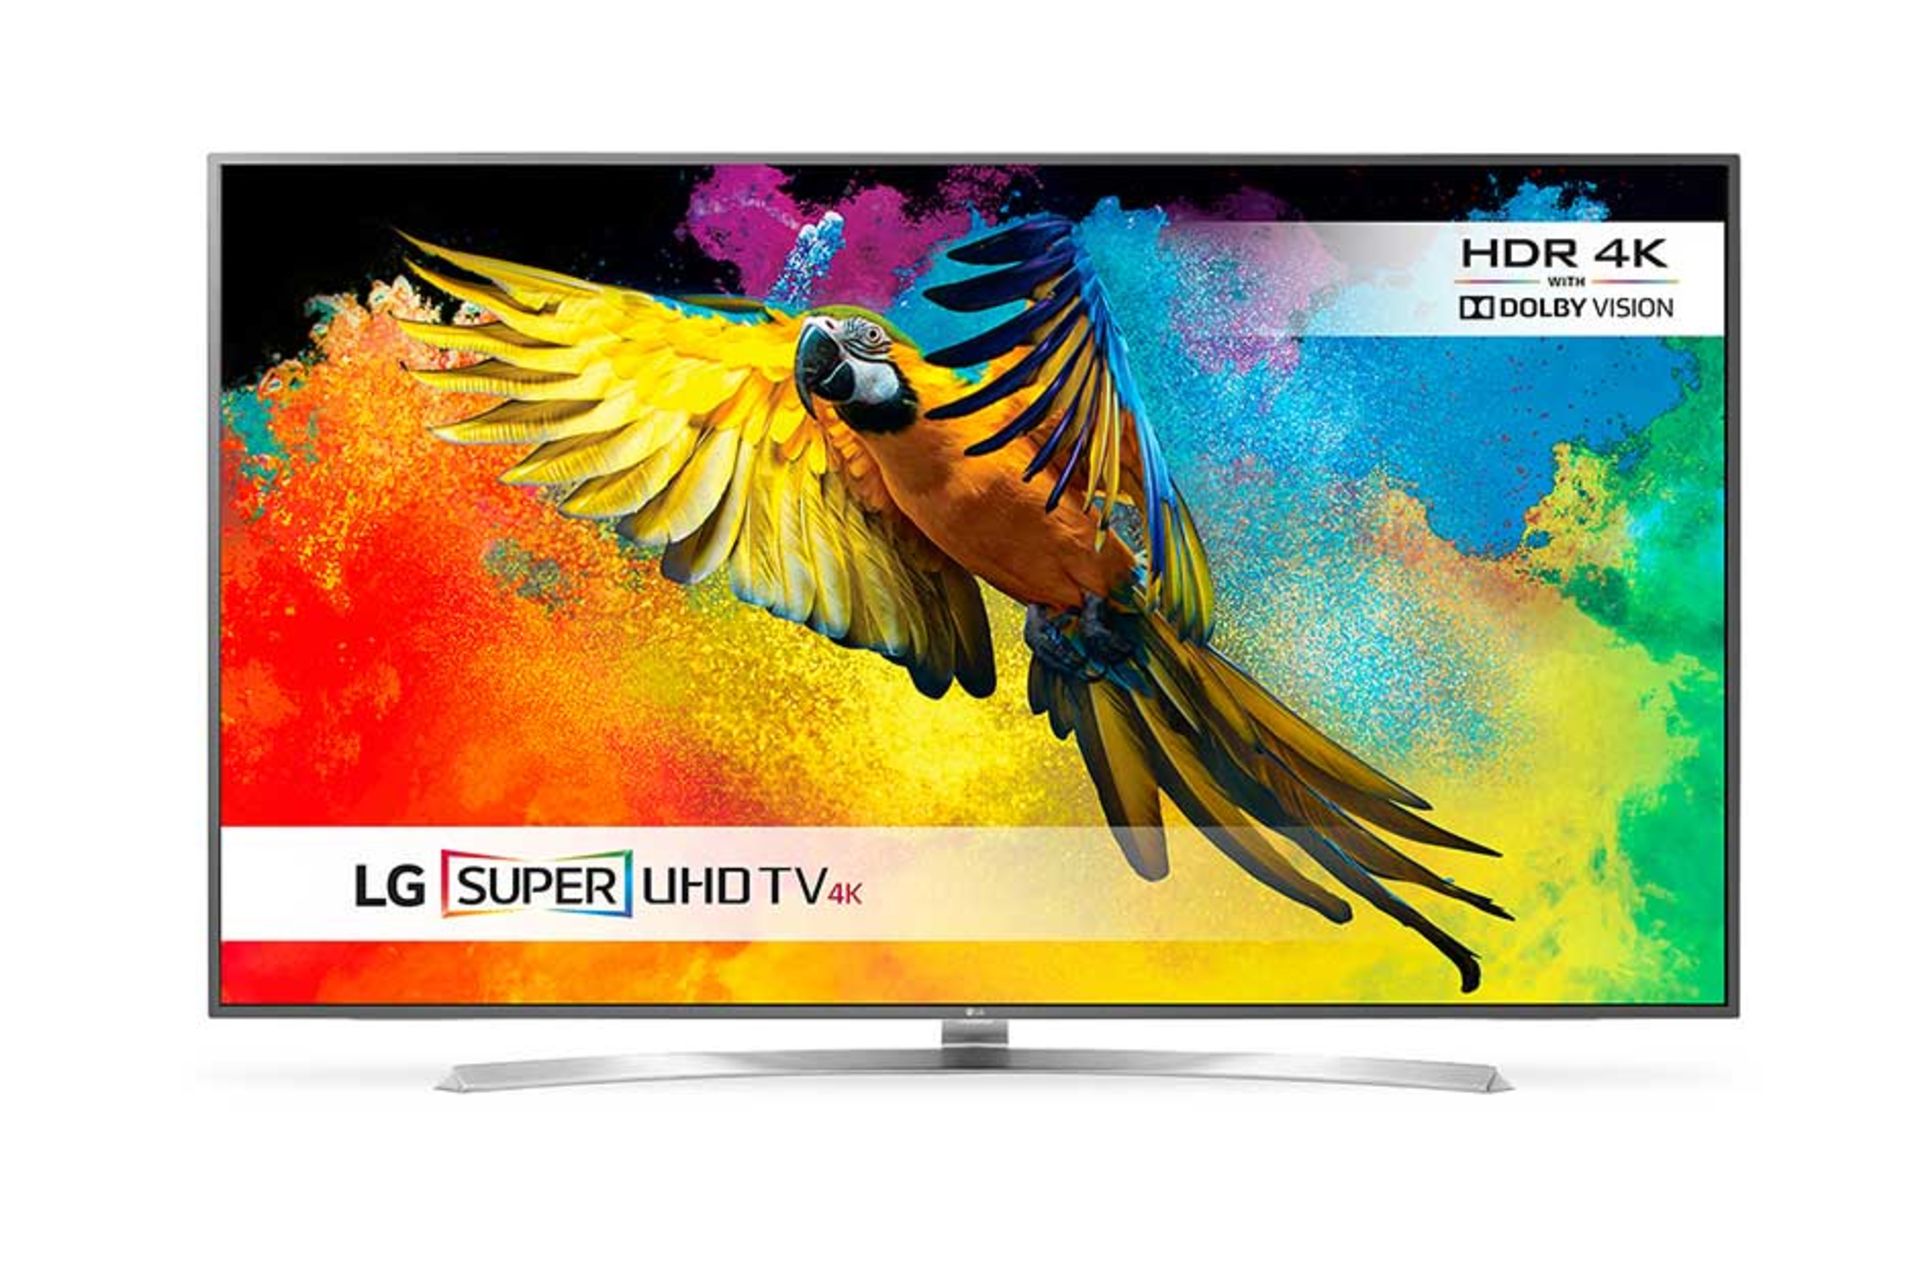 V Grade A LG 75 Inch HDR 4K SUPER ULTRA HD LED 3D SMART TV WITH FREEVIEW HD & WEBOS 3.5 & WIFI